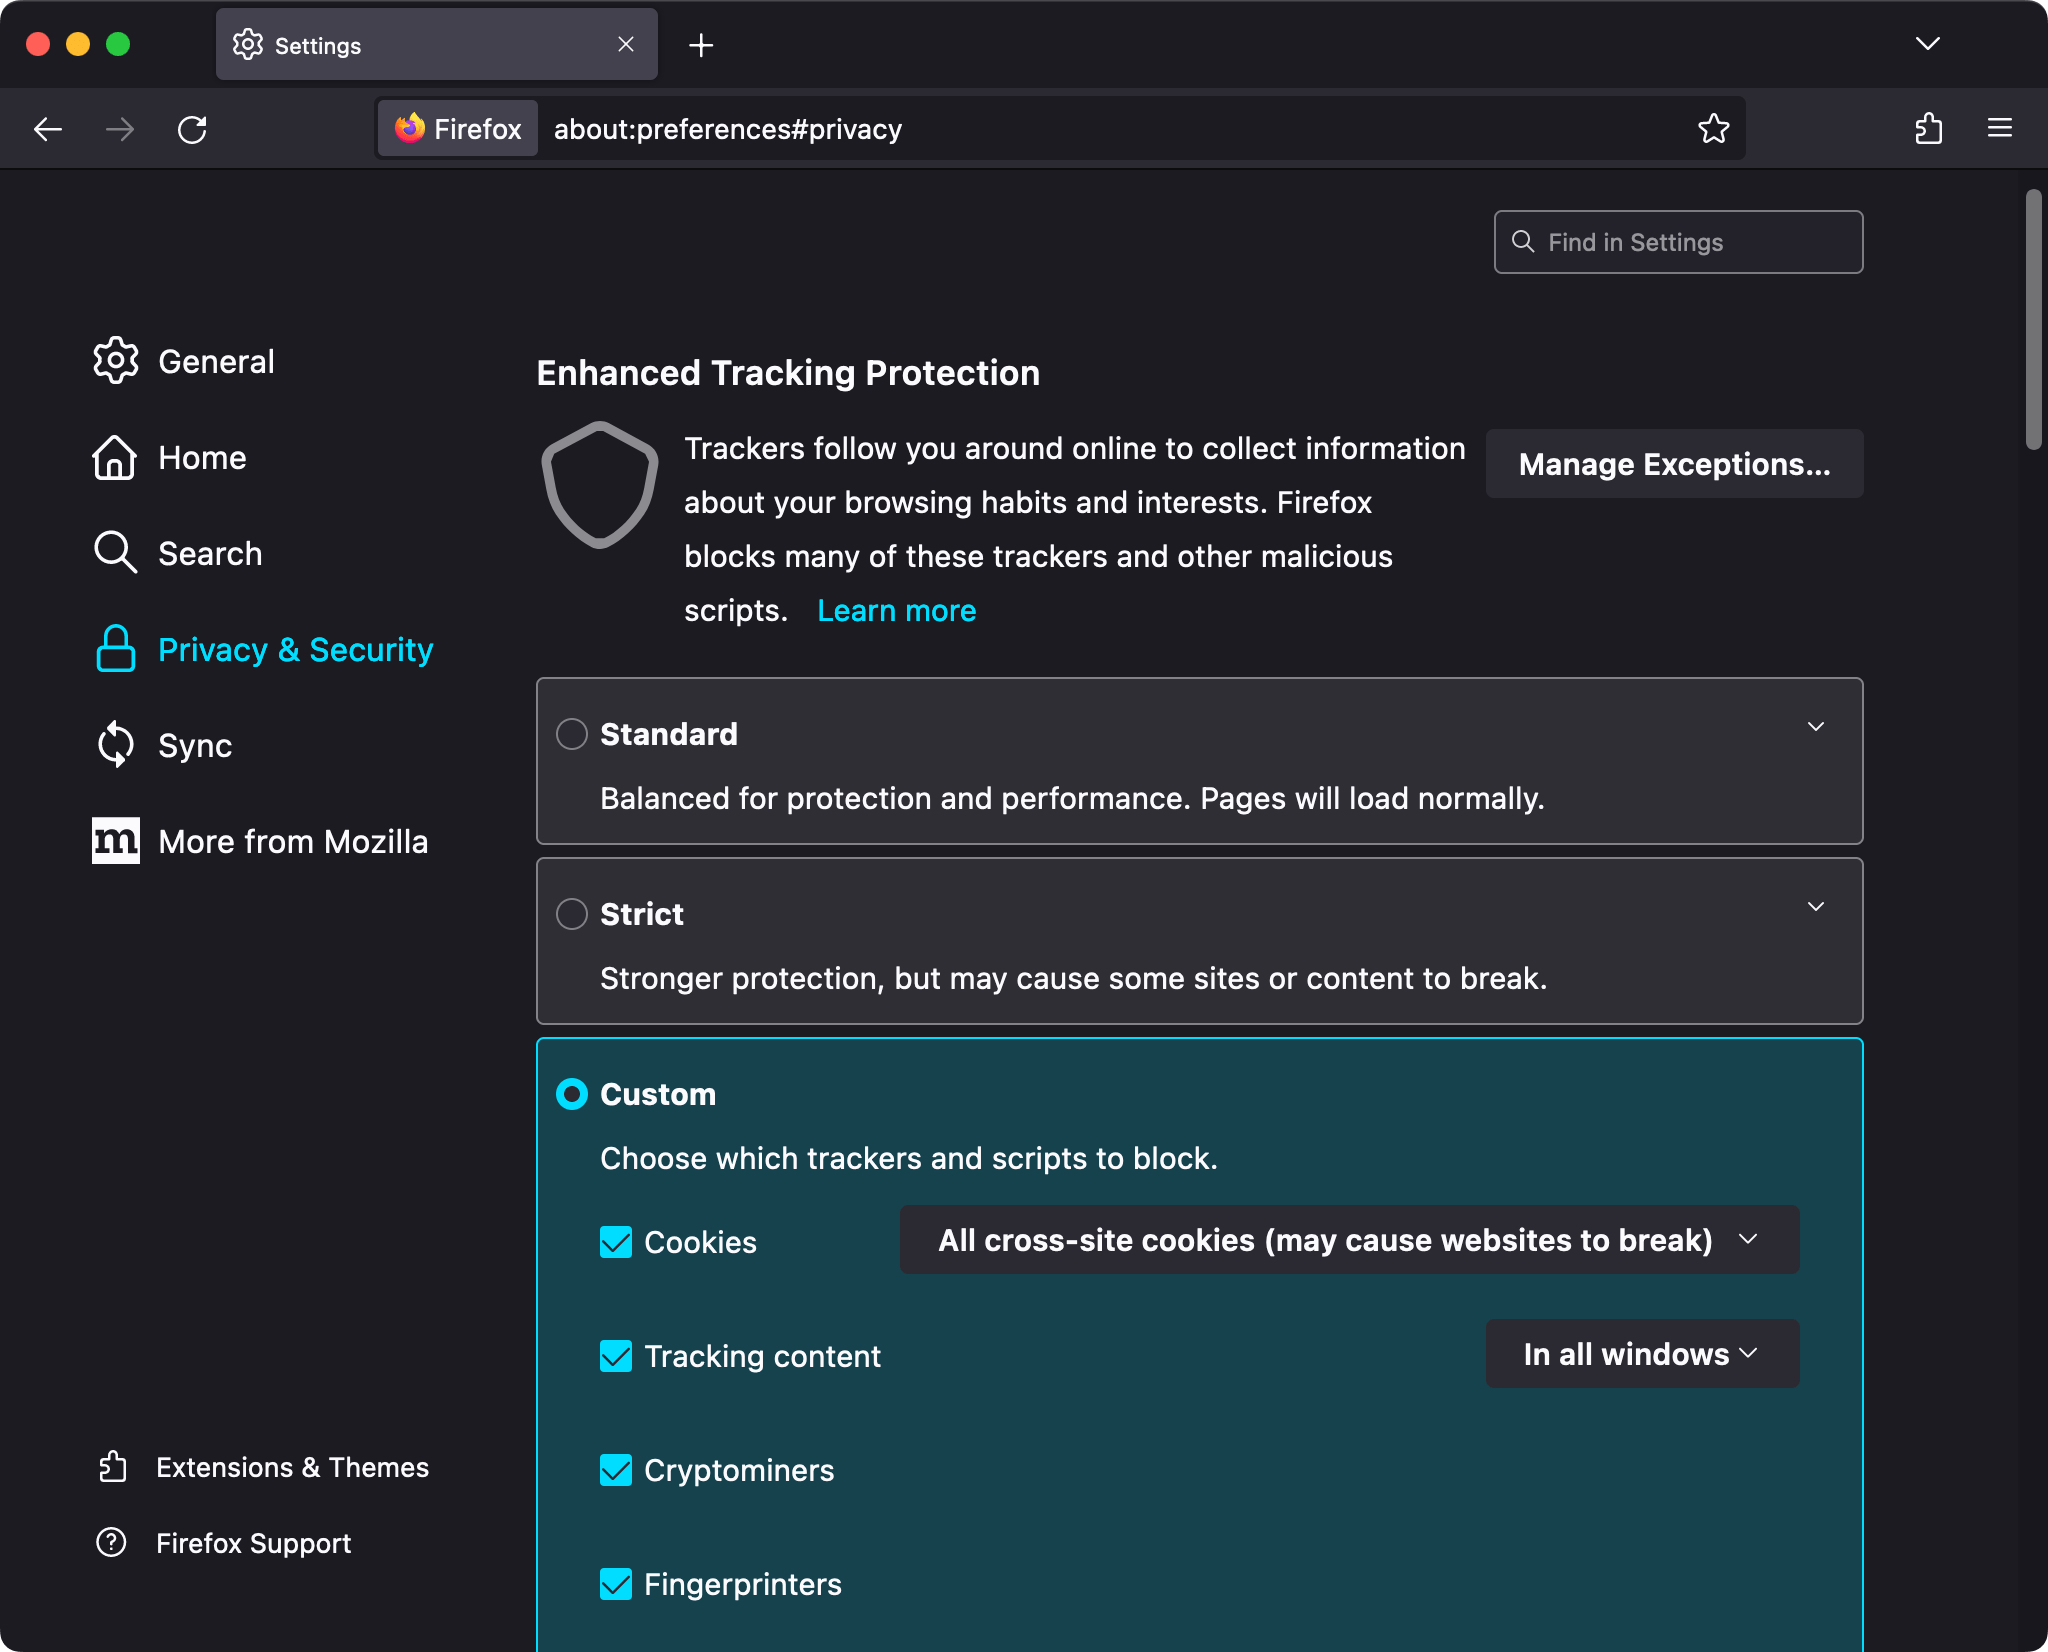 The Firefox “Privacy & Security” settings page showing that Enhanced Tracking Protection is set to “Custom”, and to “Cookies: All cross-site cookies (may cause websites to break)”.